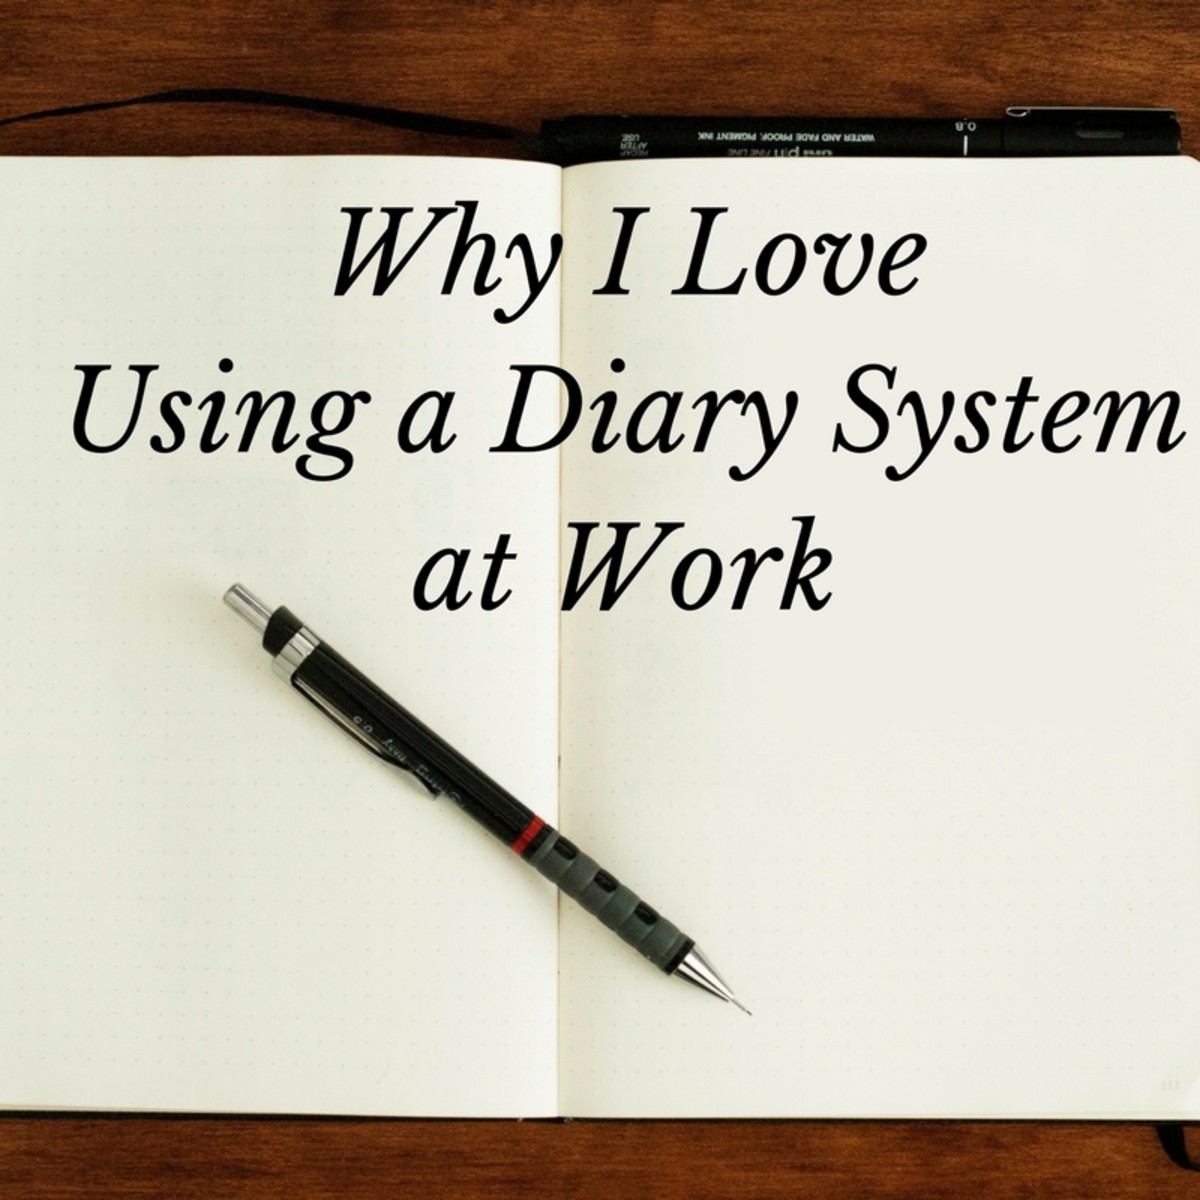 use-diary-systems-a-personal-statement-nvq-business-and-administration